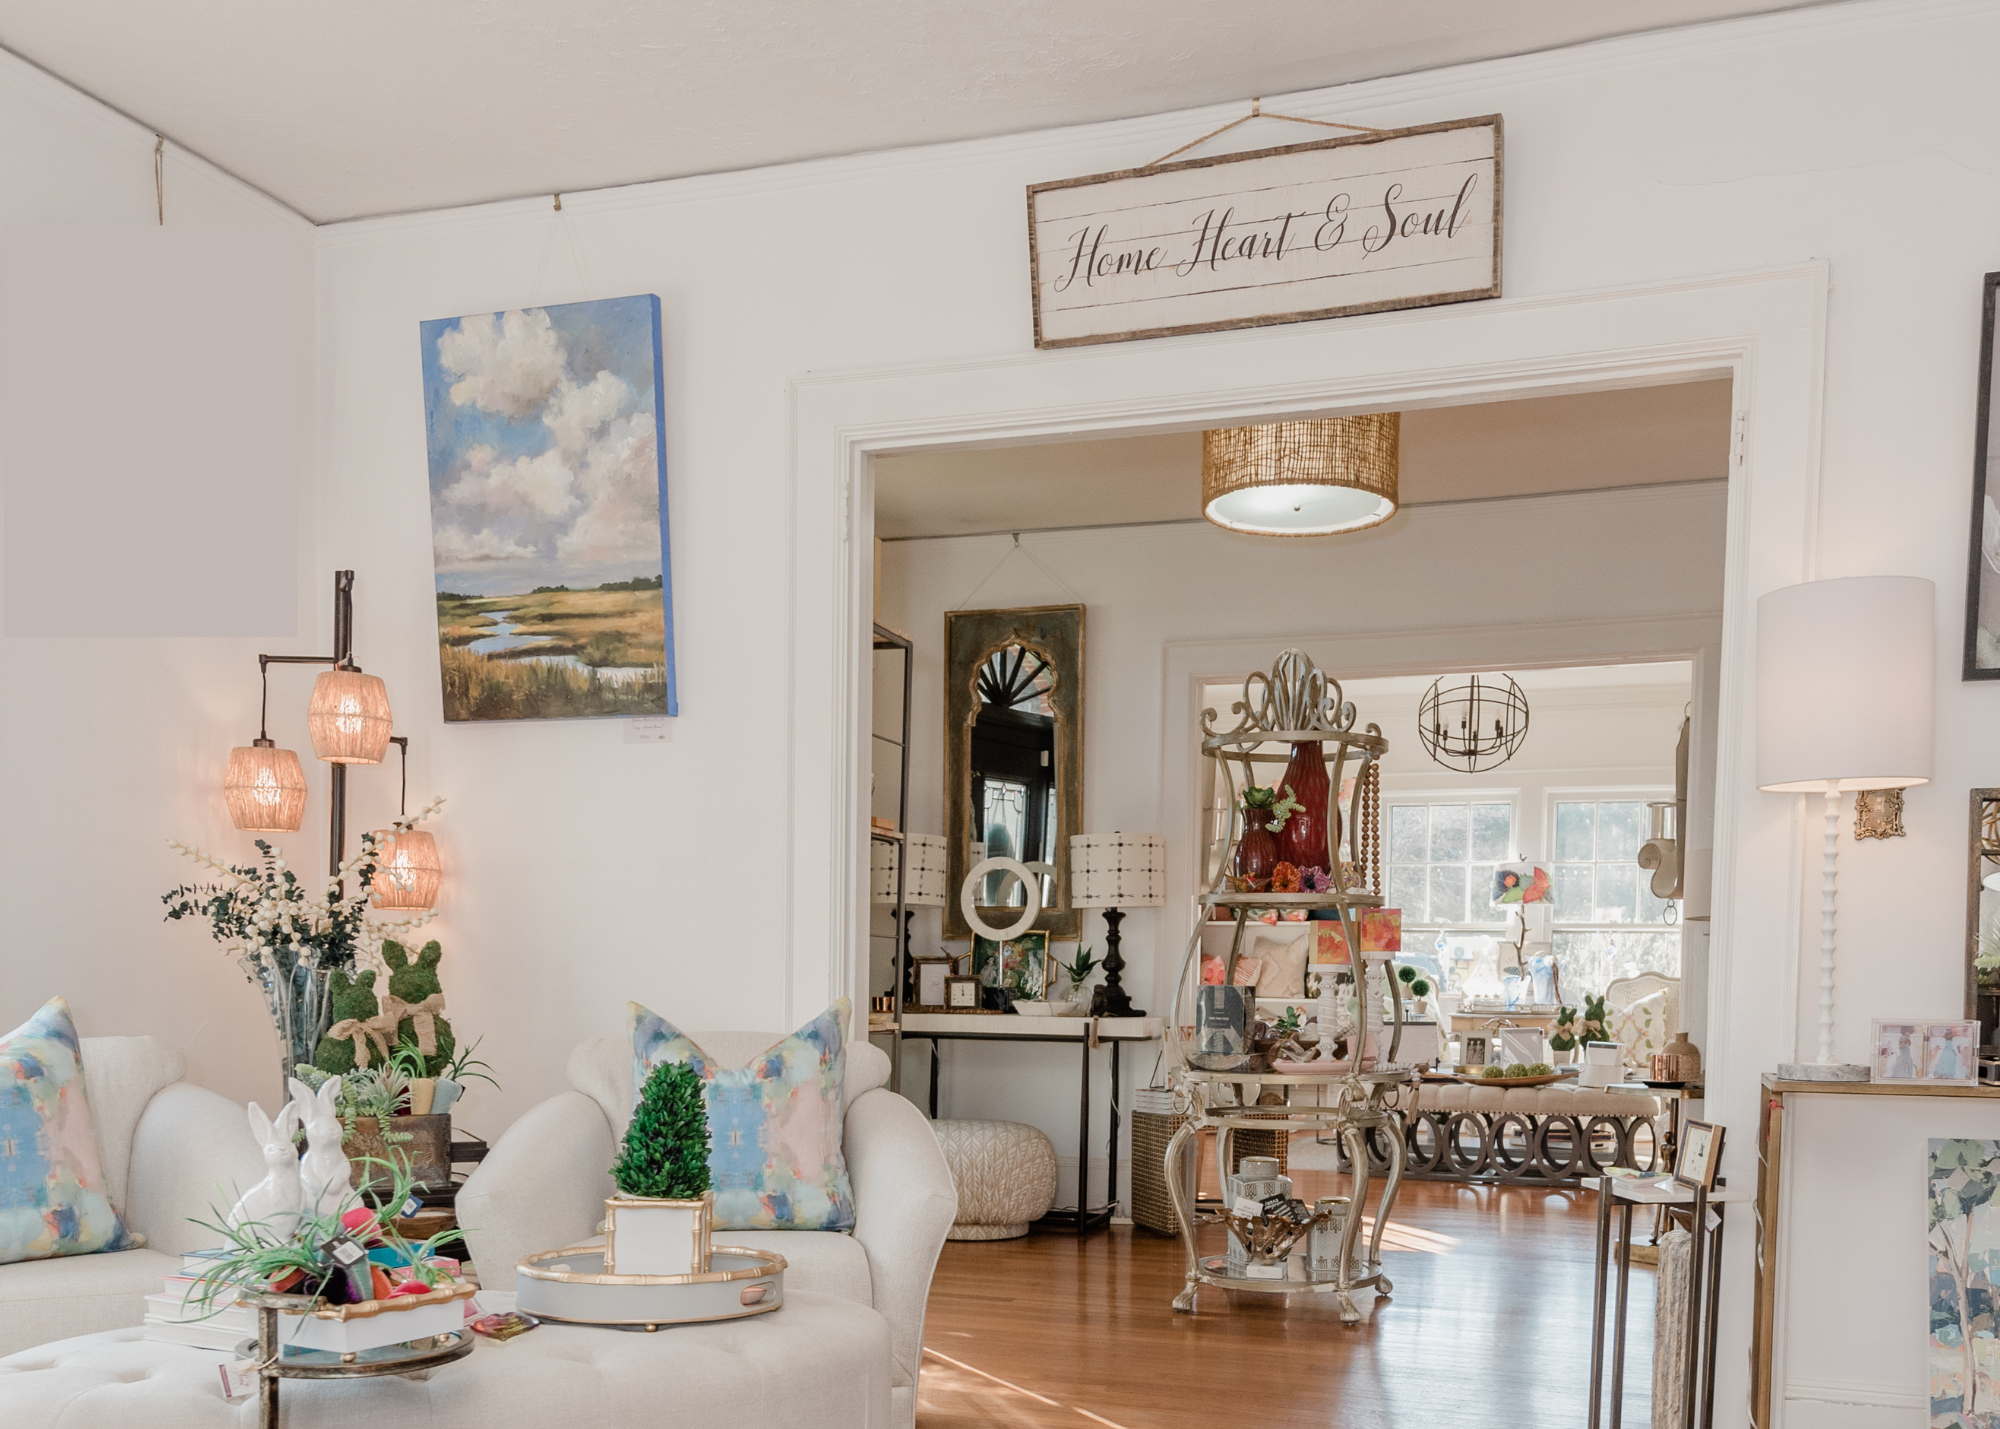 Photo of the inside of Home, Heart, & Soul, a home décor & gift shop in Cornelius, North Carolina. The photos features artwork, furniture, and home accessories available for purchase.